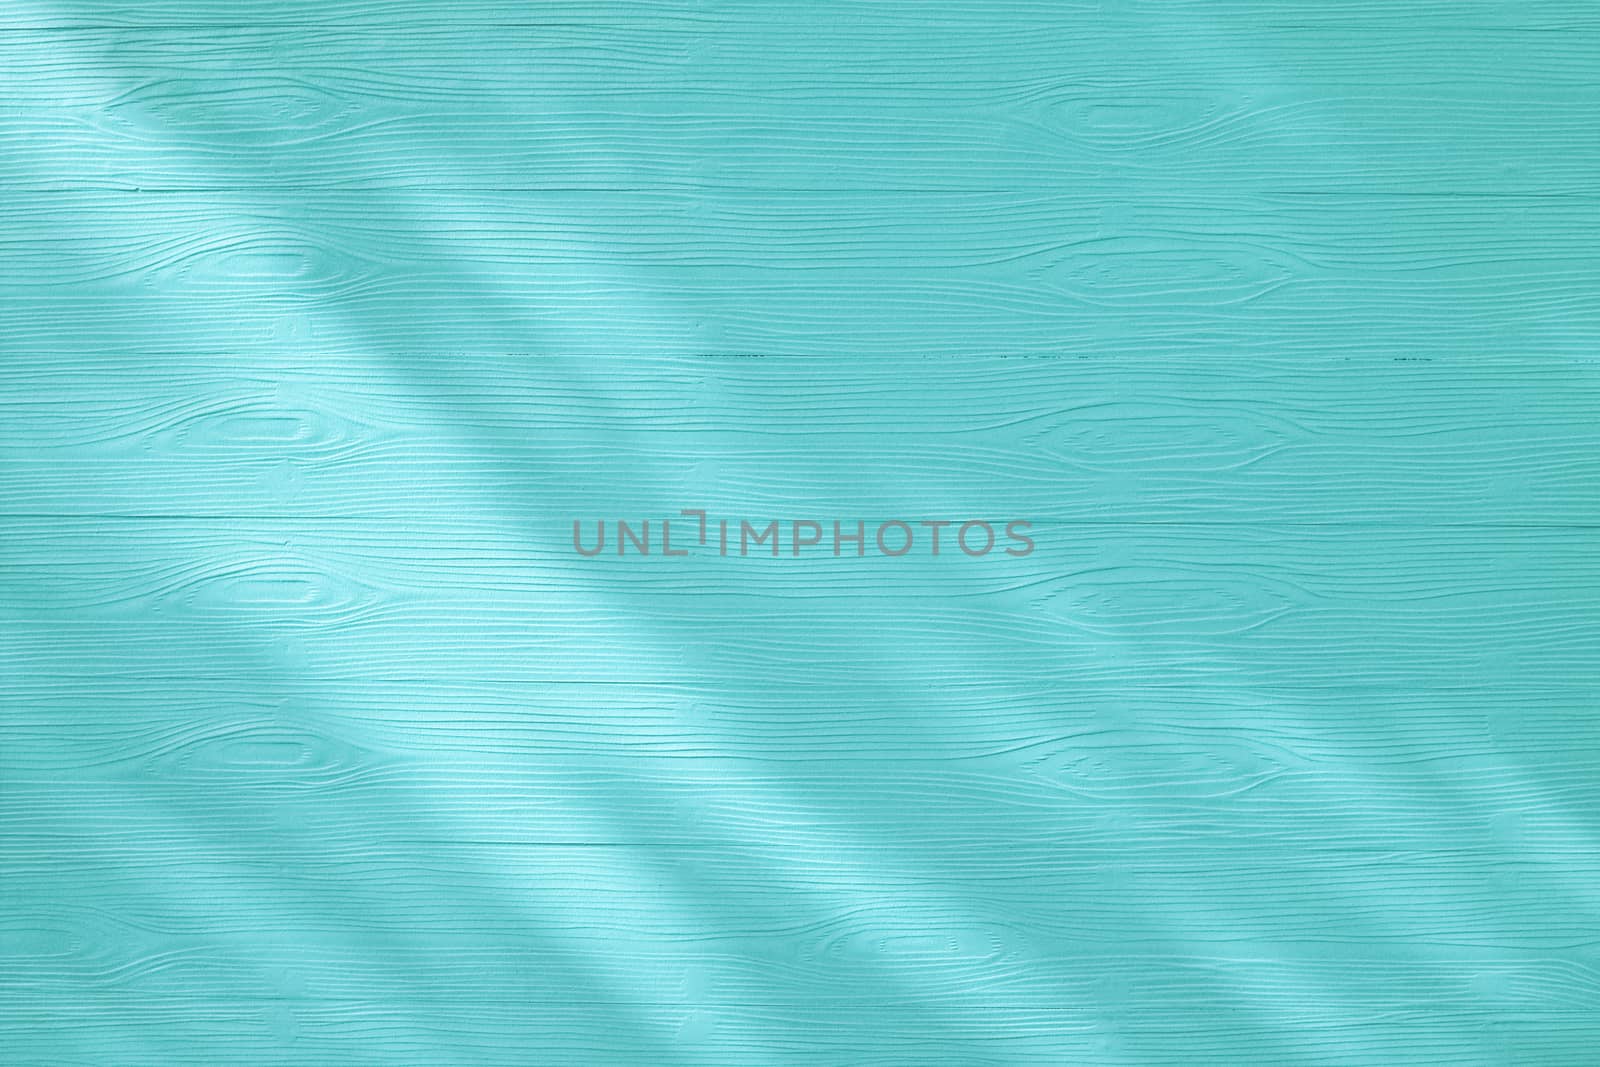 sunlight on the blue turquoise wooden board background